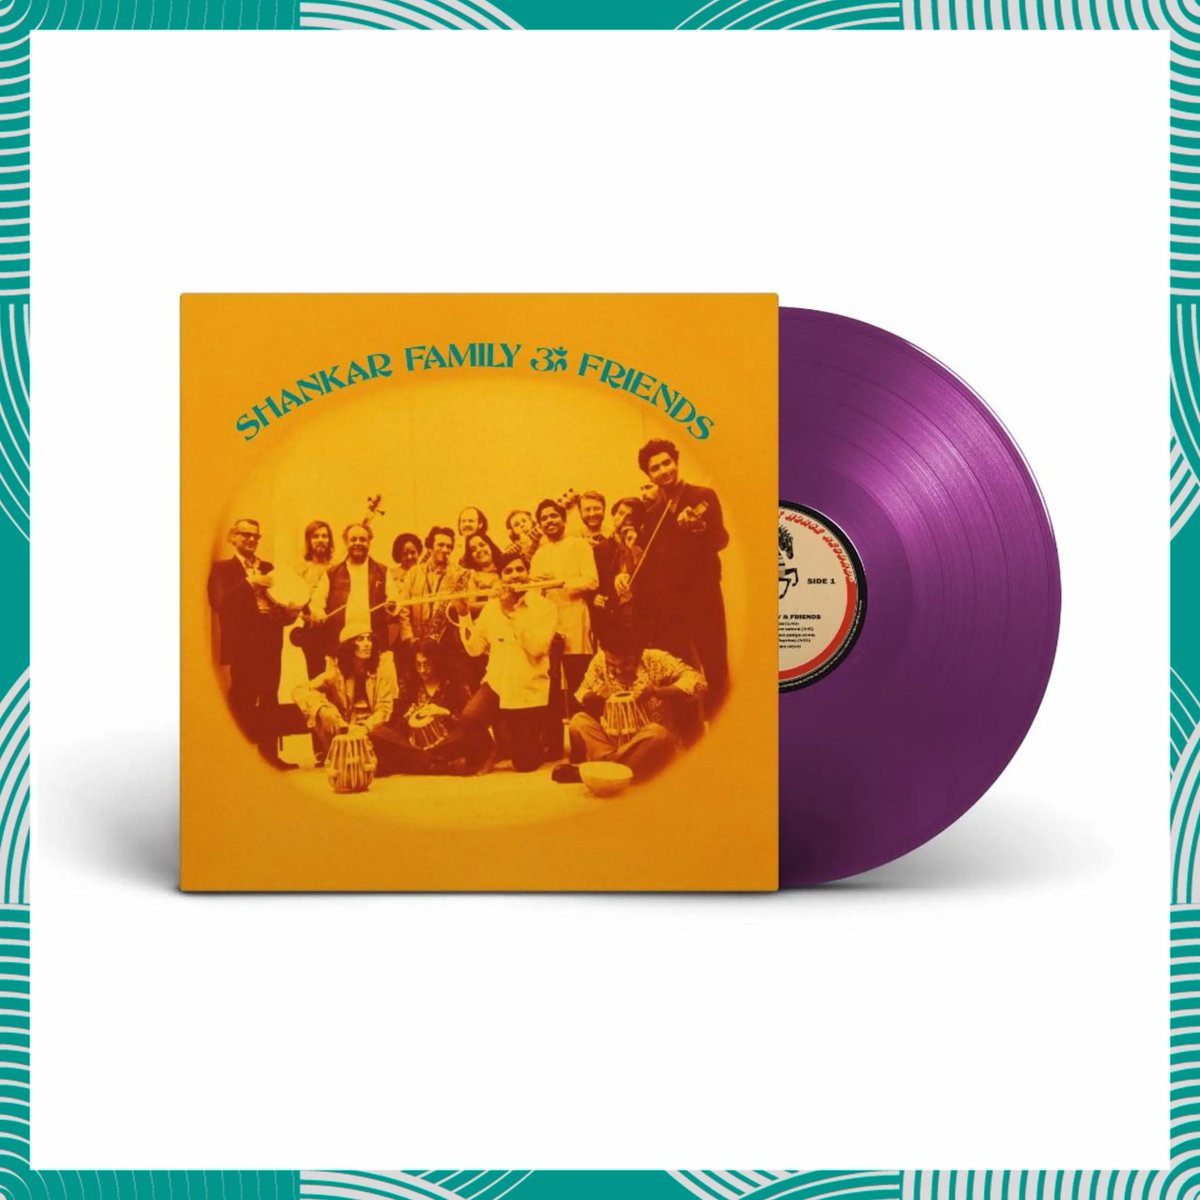 #RaviShankar's classic album ‘Shankar Family and Friends’ produced by @GeorgeHarrison has today been reissued by @DarkHorseRecs having been remastered at Abbey Road from the original source masters by @PaulHicksMusic. Shop now | darkhorserecords.lnk.to/shankarfamilya… #GeorgeHarrison #Vinyl